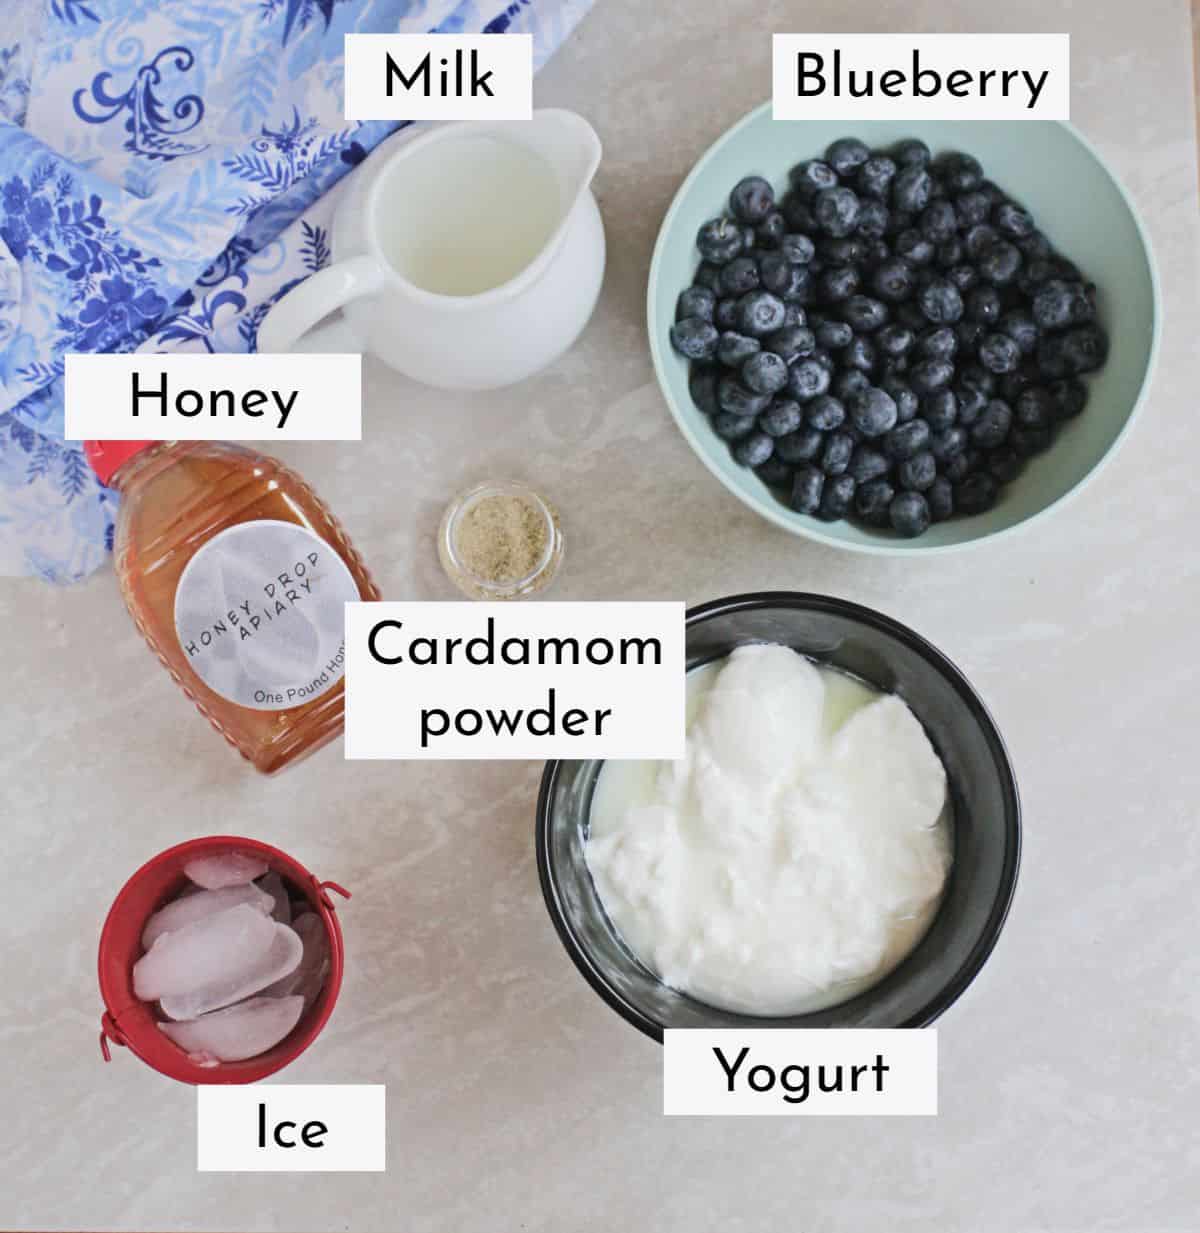 Ingredients needed to make blueberry lassi.